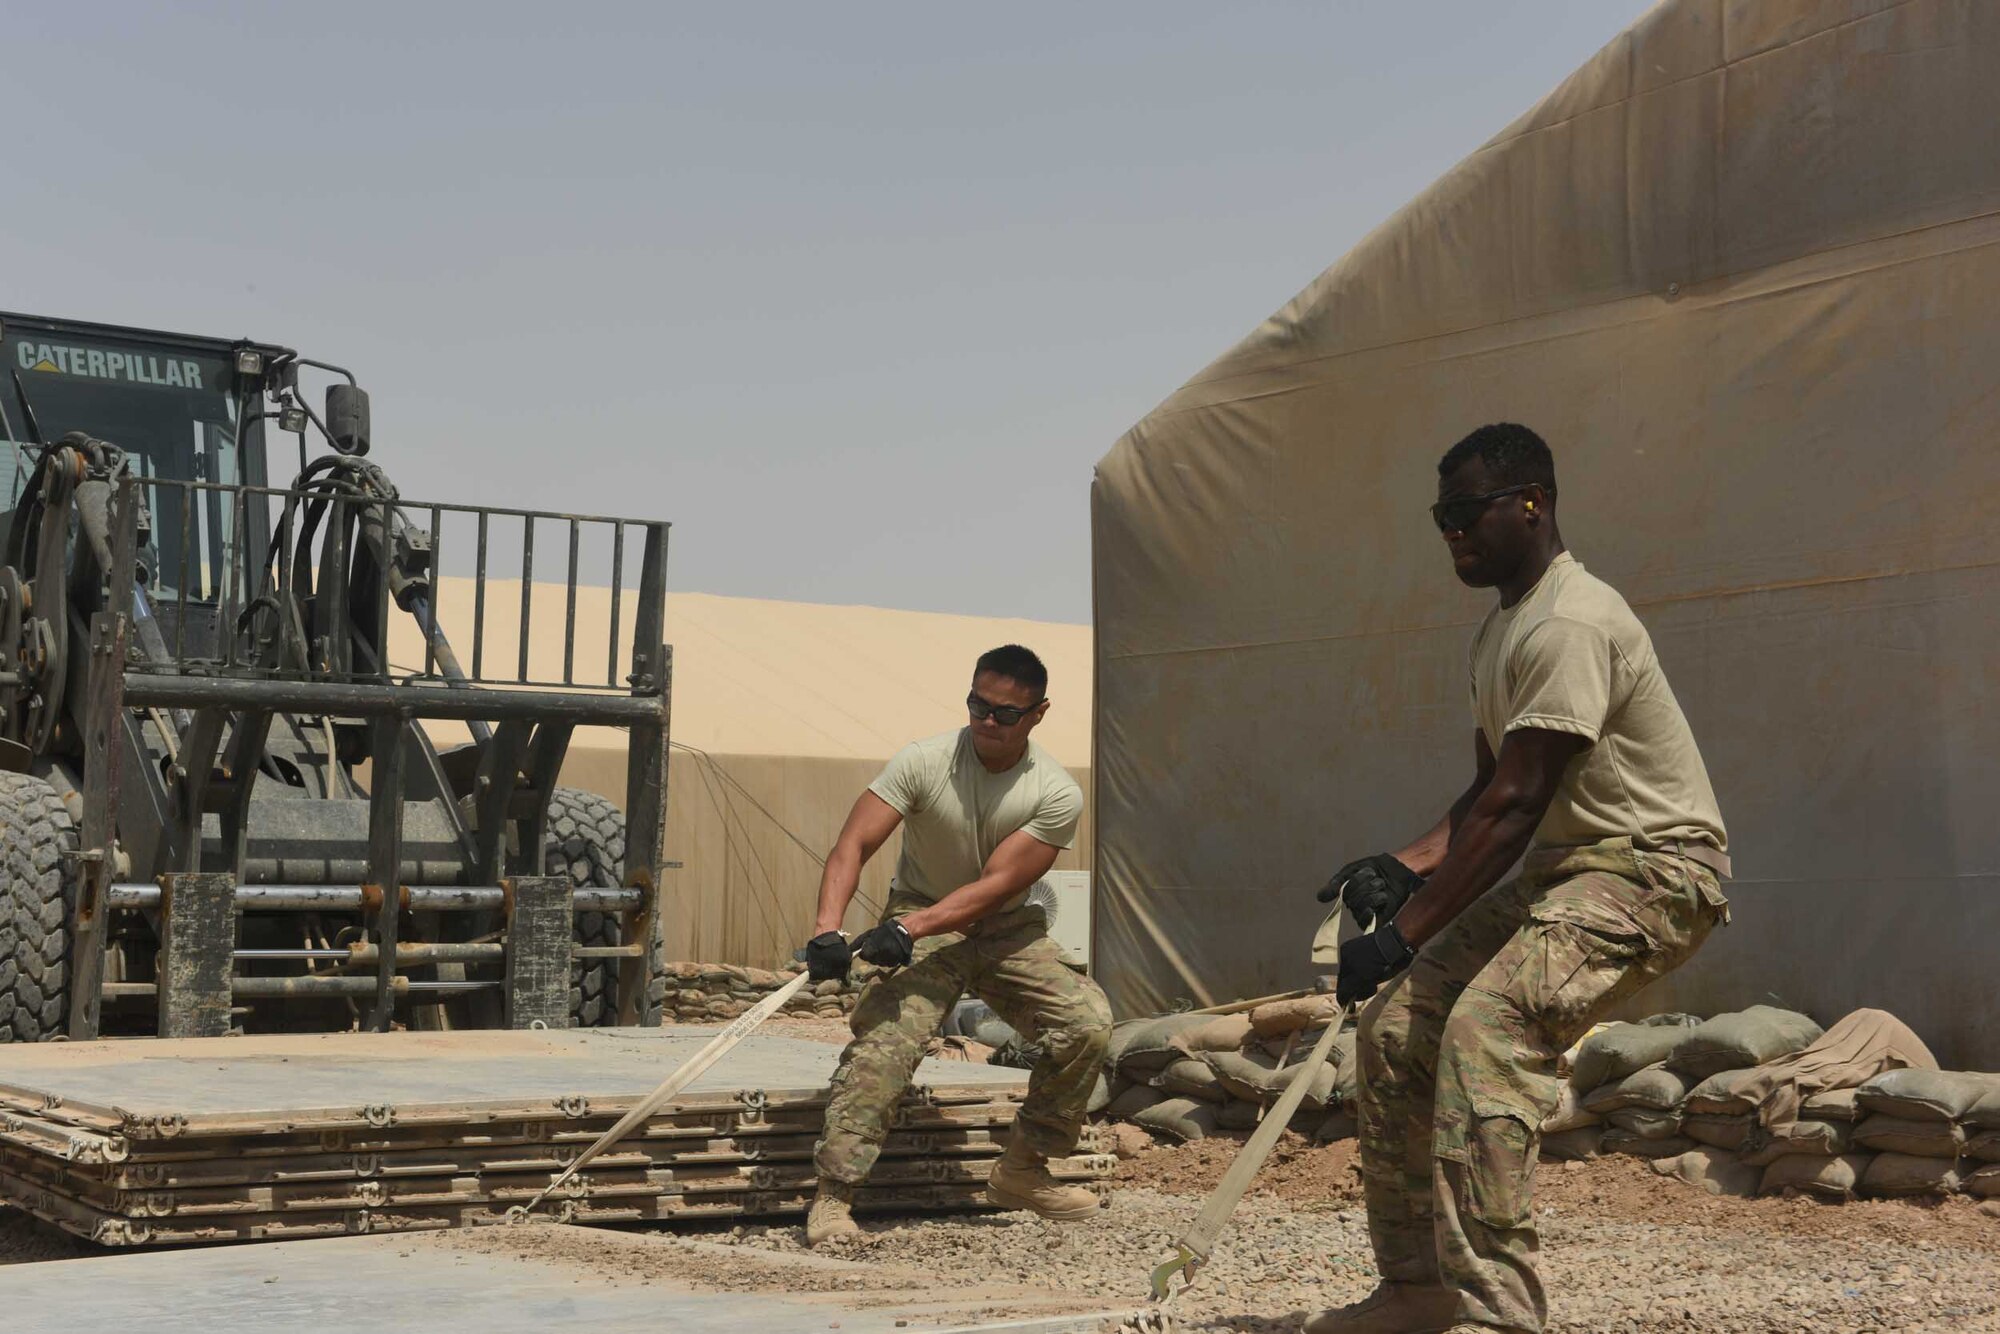 U.S. Air Force Senior Airman Tristan Gavia and Airman 1st Class Nestore Chenue, both air transportation specialists deployed in support of Combined Joint Task Force – Operation Inherent Resolve and assigned to the 442nd Air Expeditionary Squadron, work together to pull a 463L pallet during a pallet recovery mission at Qayyarah West Airfield, Iraq, July 2, 2017. The aerial porters recovered the unclaimed pallets as part of a larger U.S. Air Force aerial port pallet recovery initiative taking place across Iraq.  CJTF-OIR is the global Coalition to defeat ISIS in Iraq and Syria. (U.S. Air Force photo by Tech. Sgt. Jonathan Hehnly)